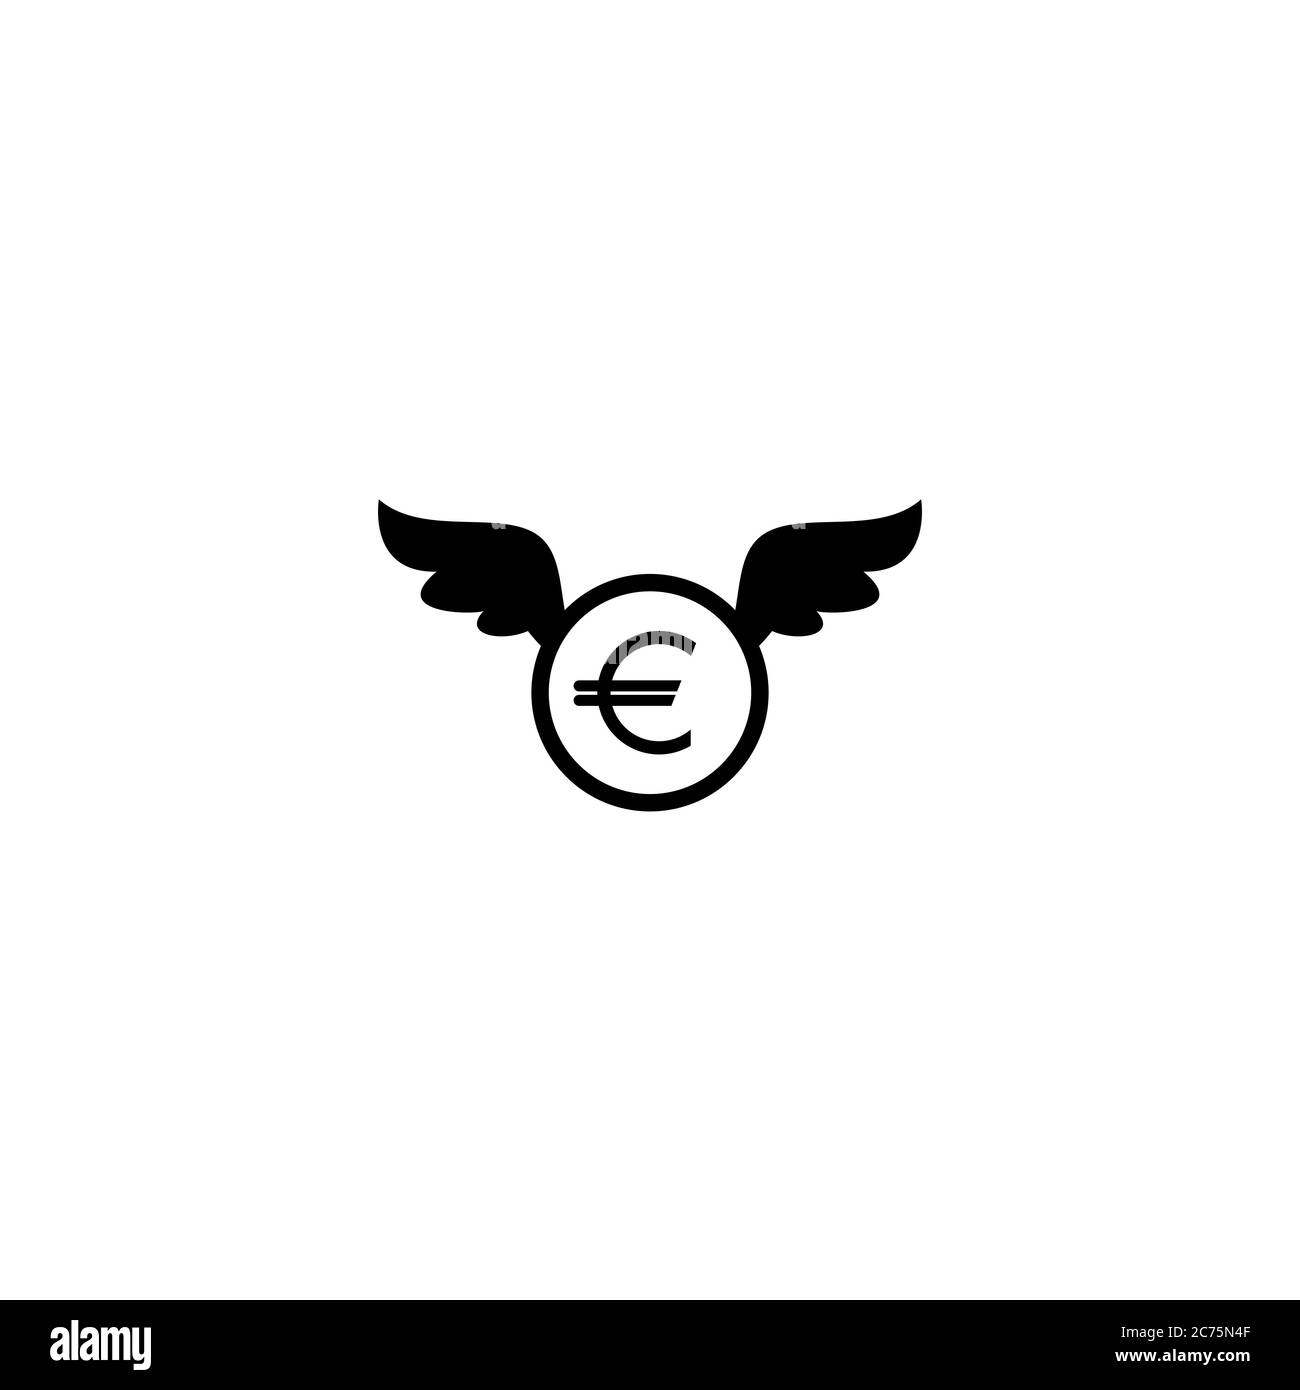 euro coin with wings. Black flat icon isolated on white background. Flying money. Economy, finance, money pictogram. Wealth symbol. Vector illustratio Stock Vector